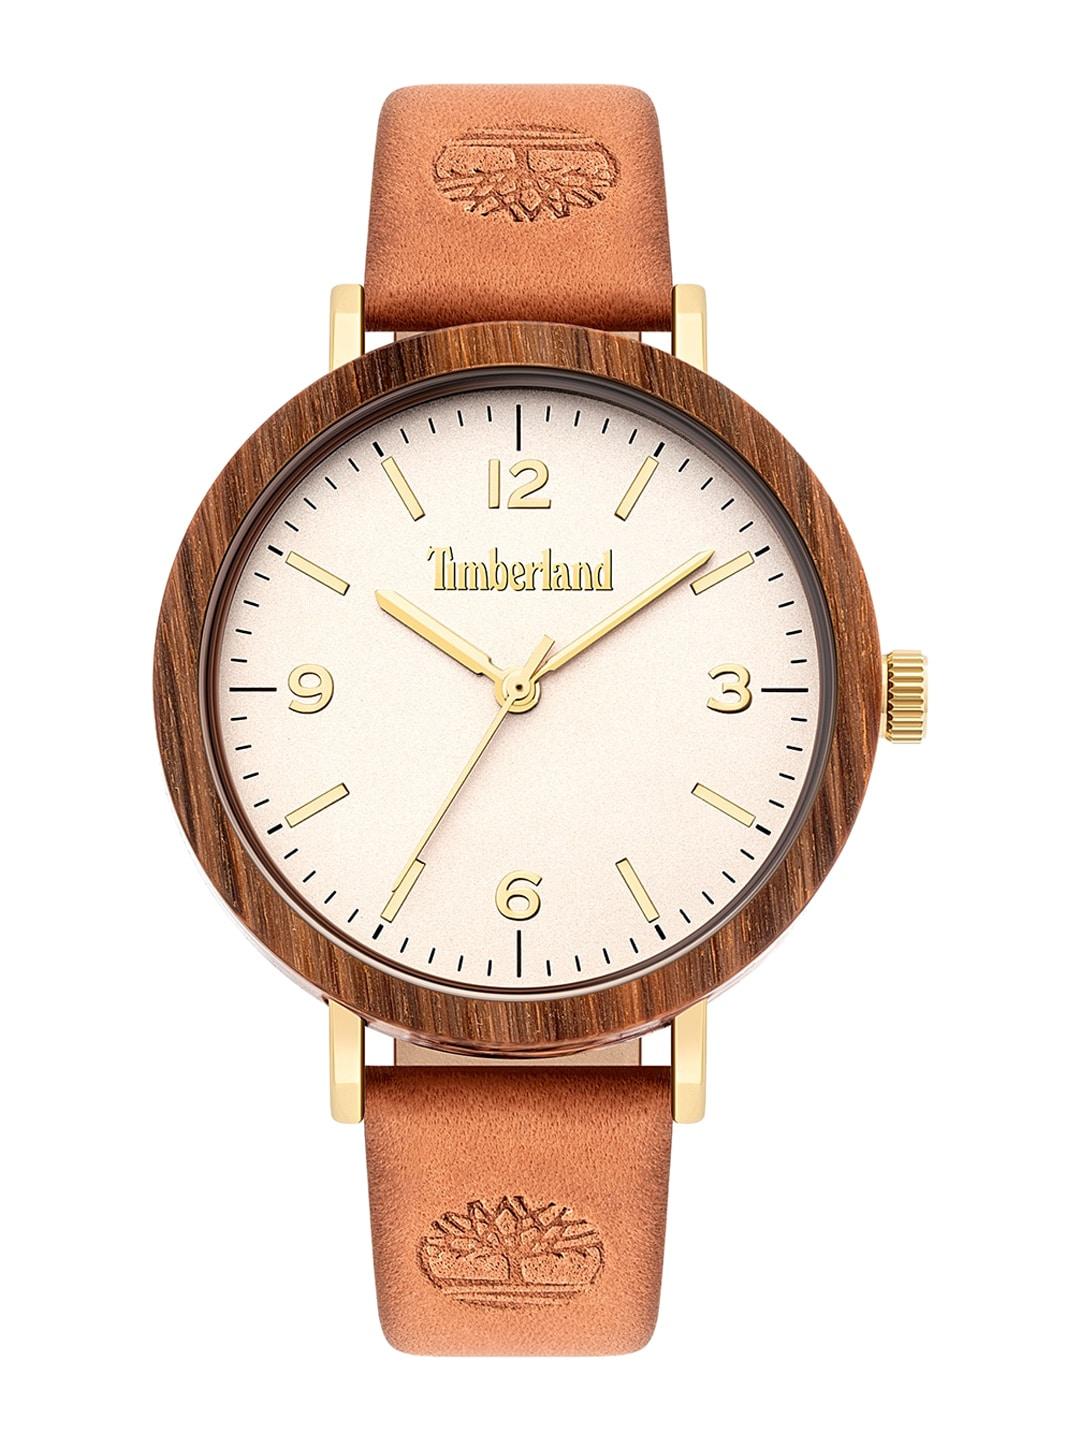 Timberland Women Beige Dial & Brown Leather Strap Analogue Watch TBL.15958MYGBN/07